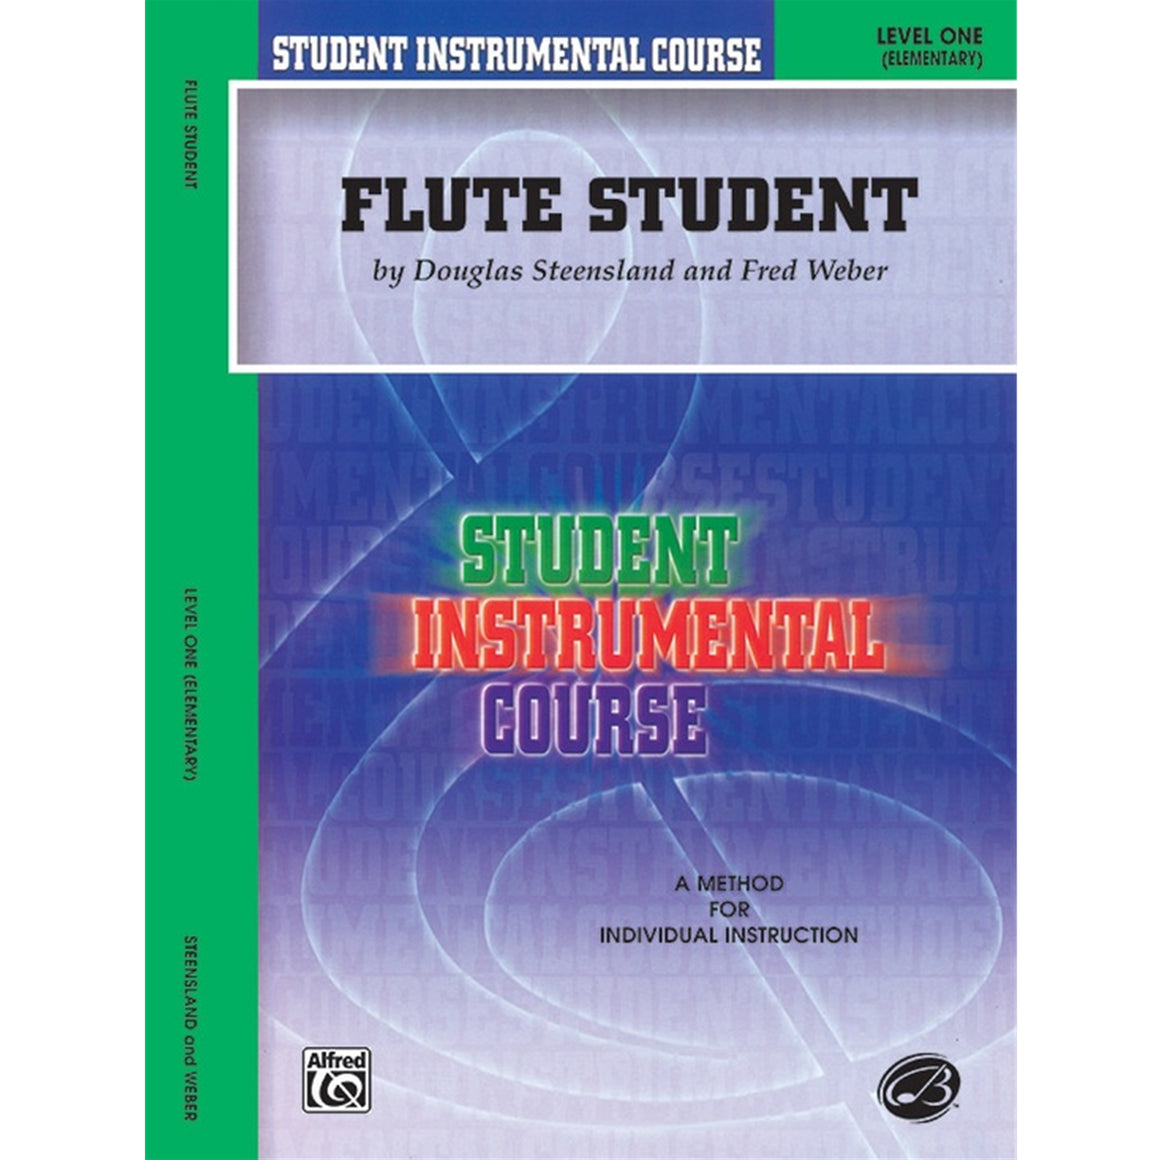 ALFRED BIC00101A Student Instrumental Course: Flute Student, Level I [Flute]